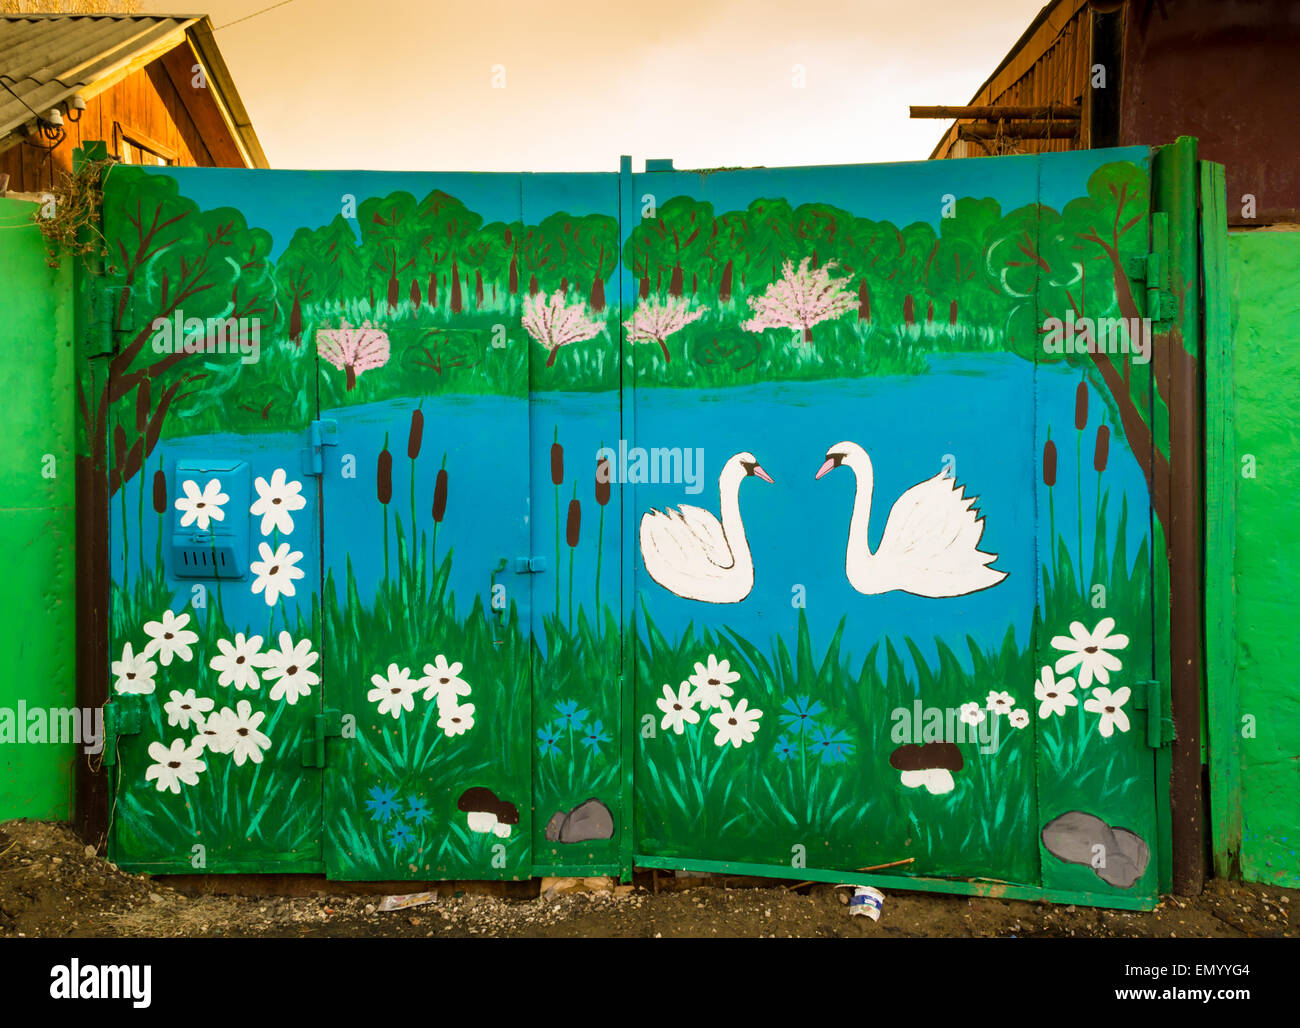 Two hand painted white swans on a home style mural of a lake painted on a garage door Stock Photo